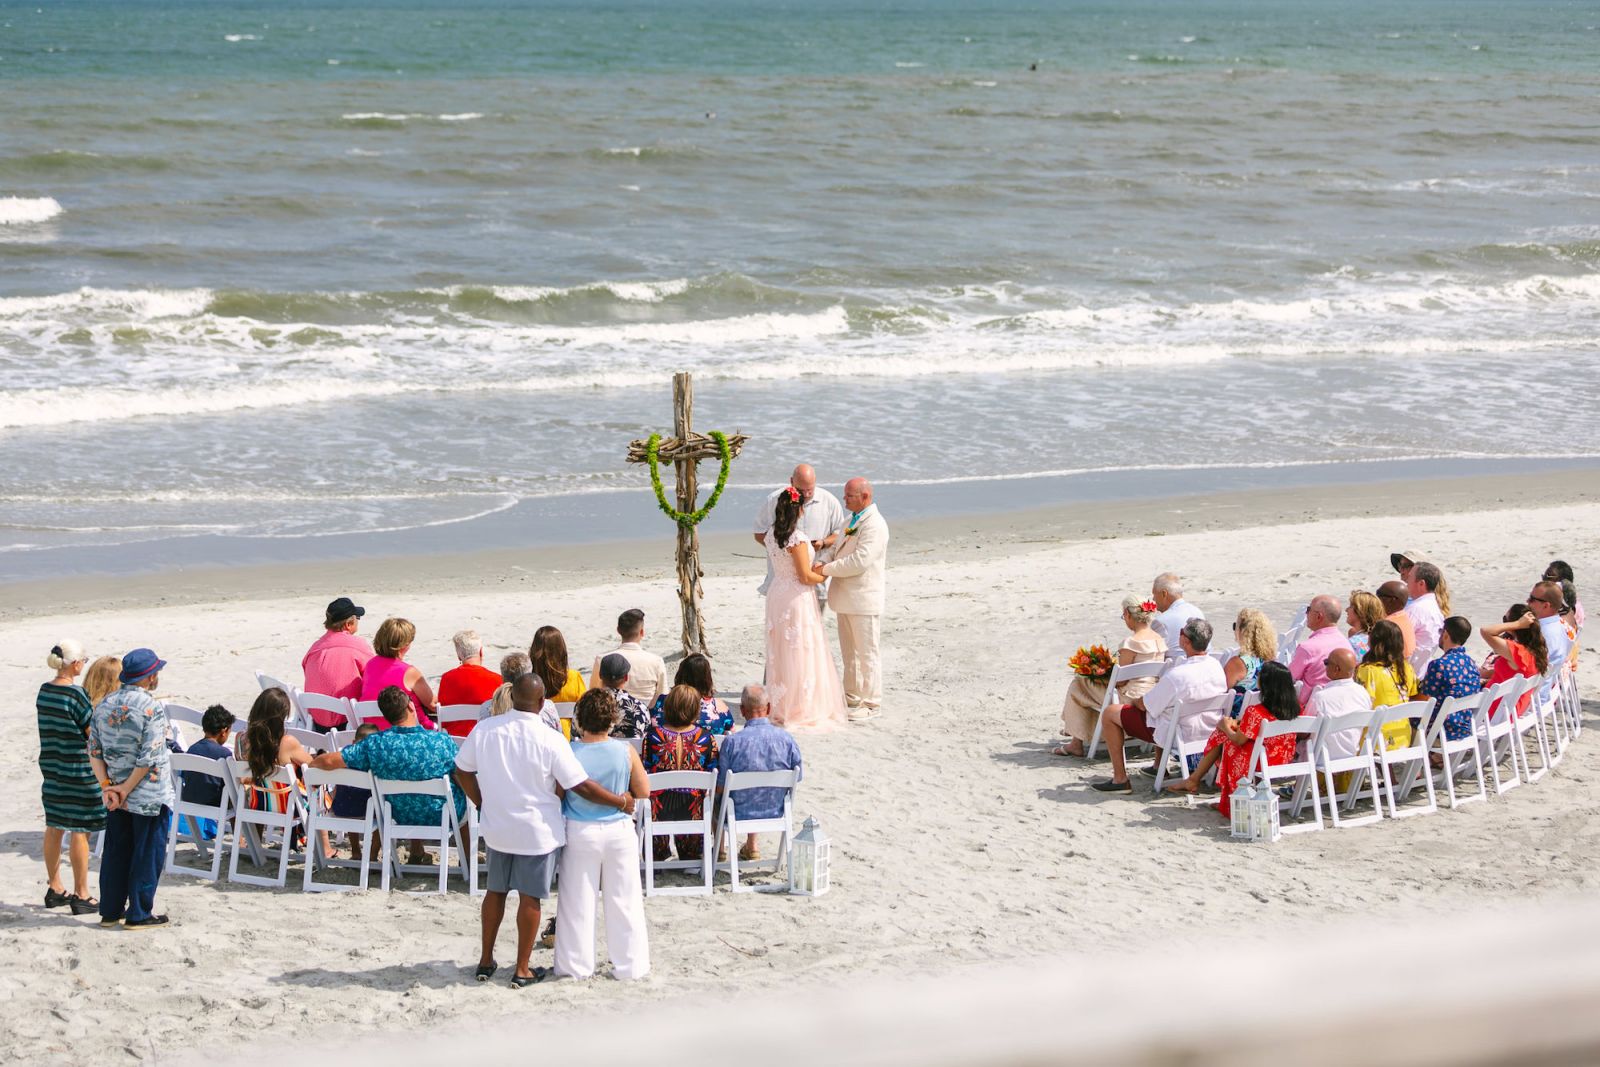 Folly Beach Wedding Ceremony at Pelican Watch Pavilion, you can see a high view of the ceremony on the beach with the ocean